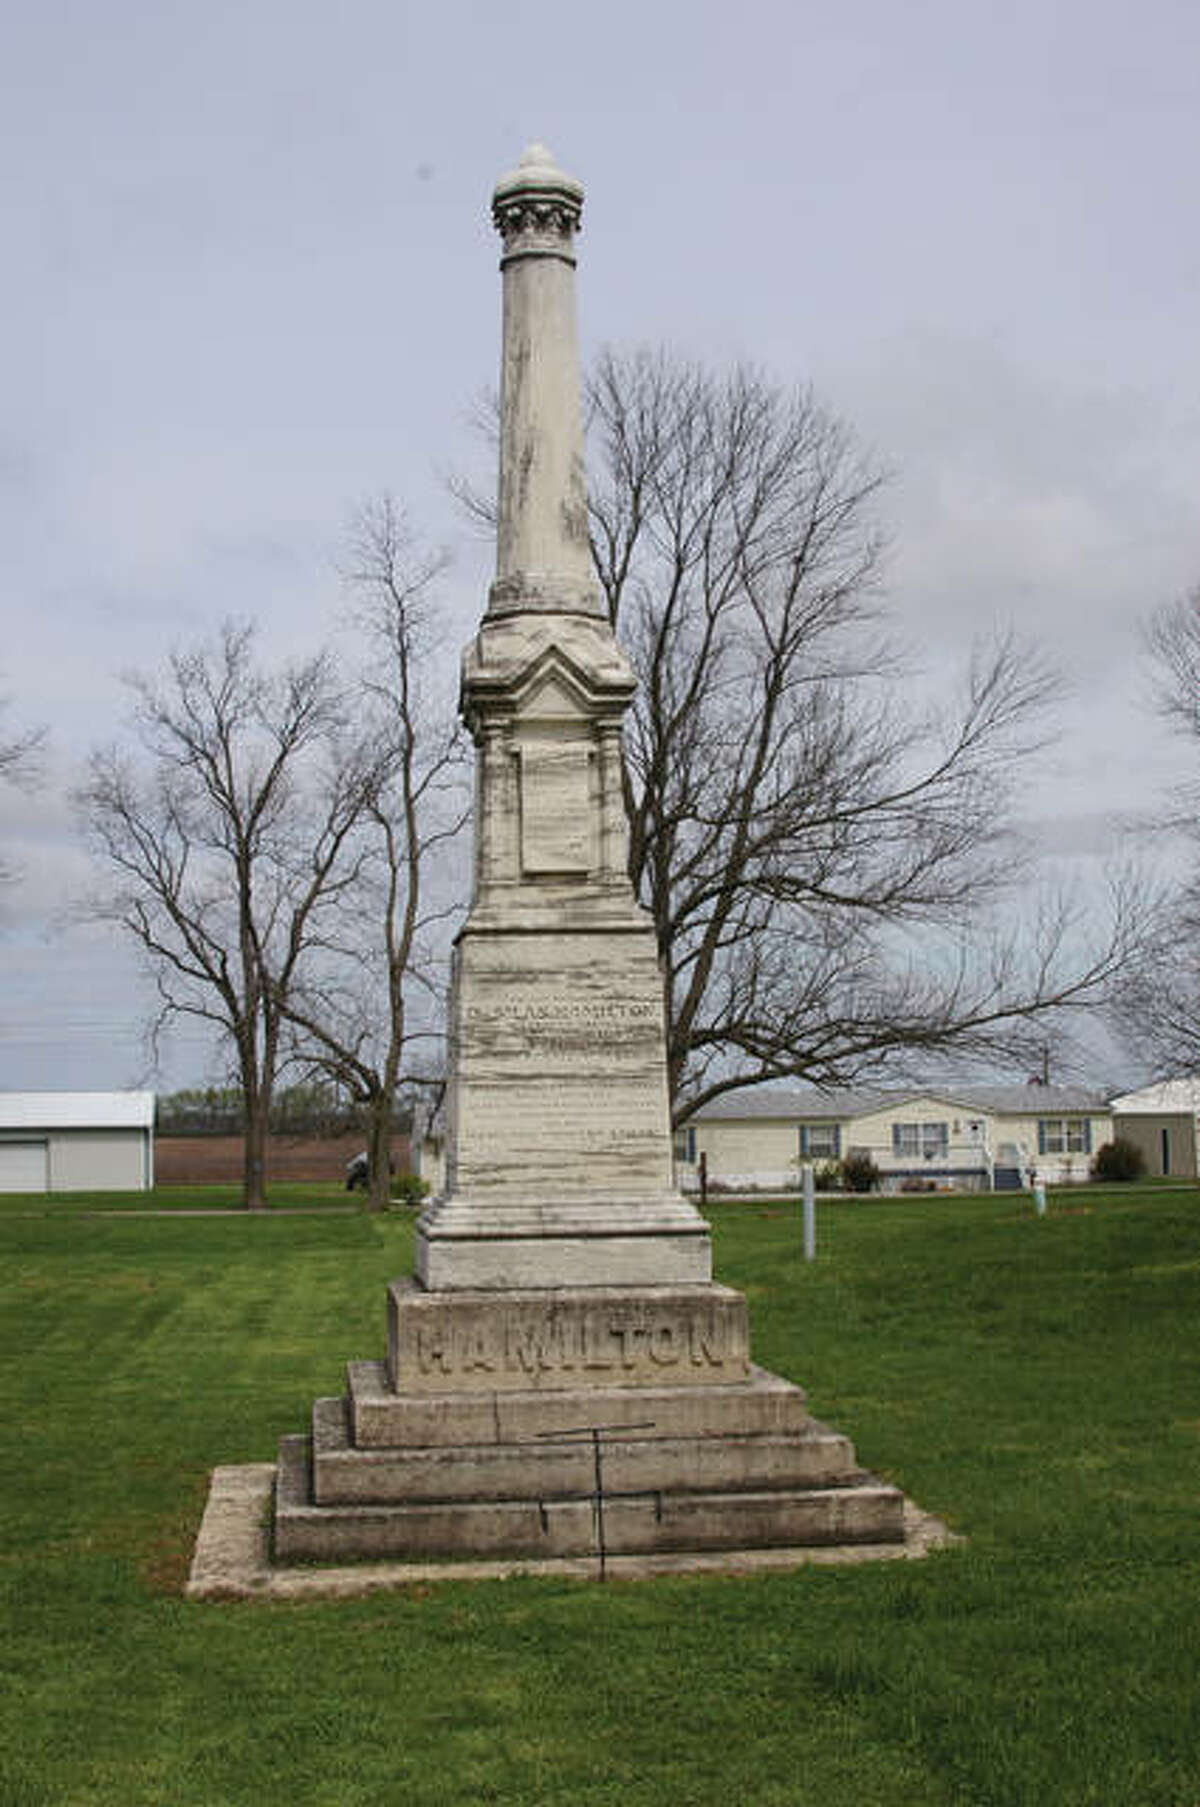 The monument to Silas Hamilton was funded by one of his former slaves.